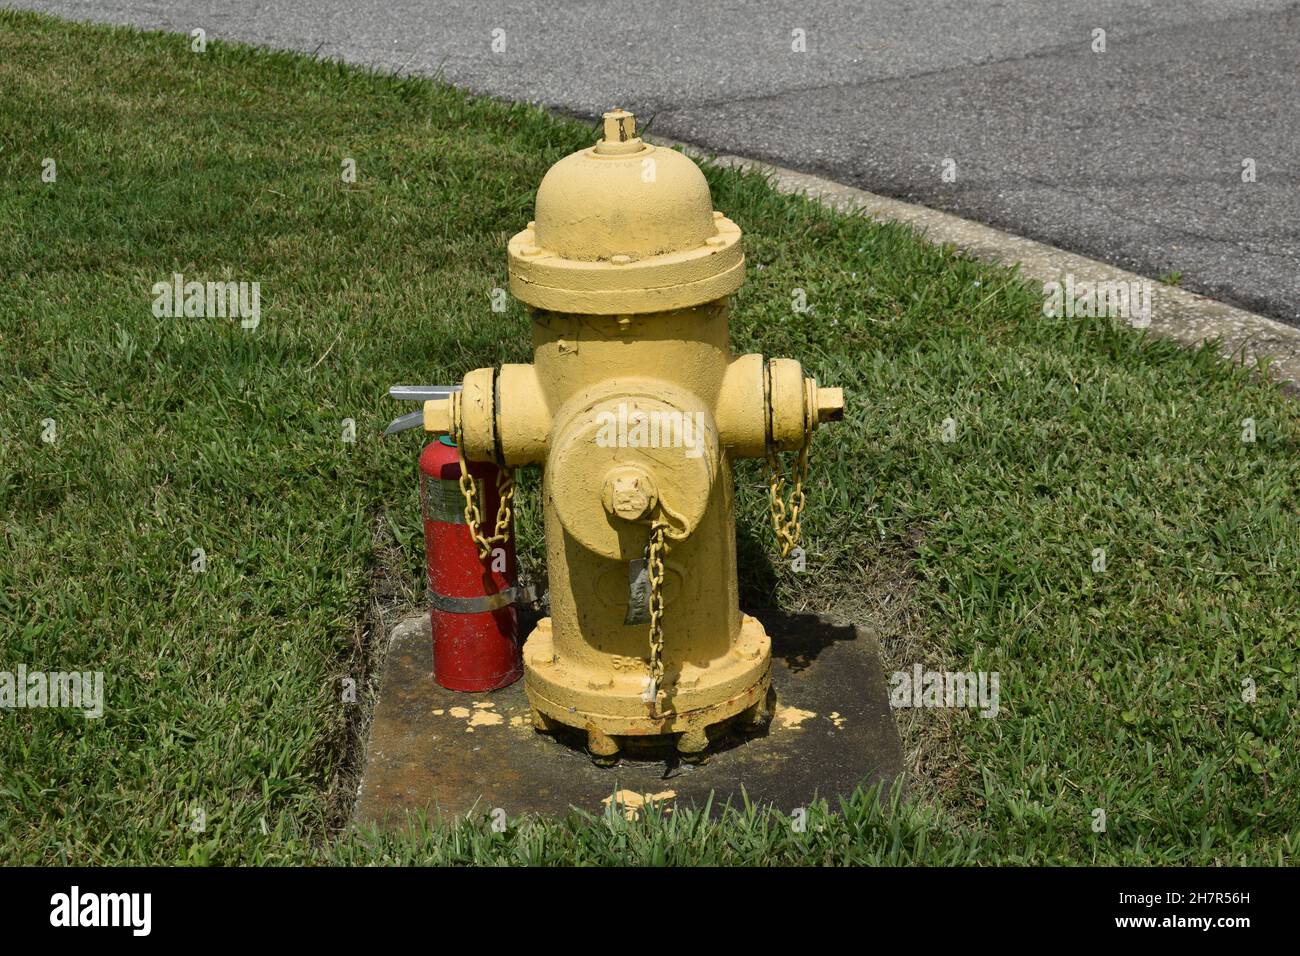 An old fire hydrant is near a portable extinguisher. Stock Photo